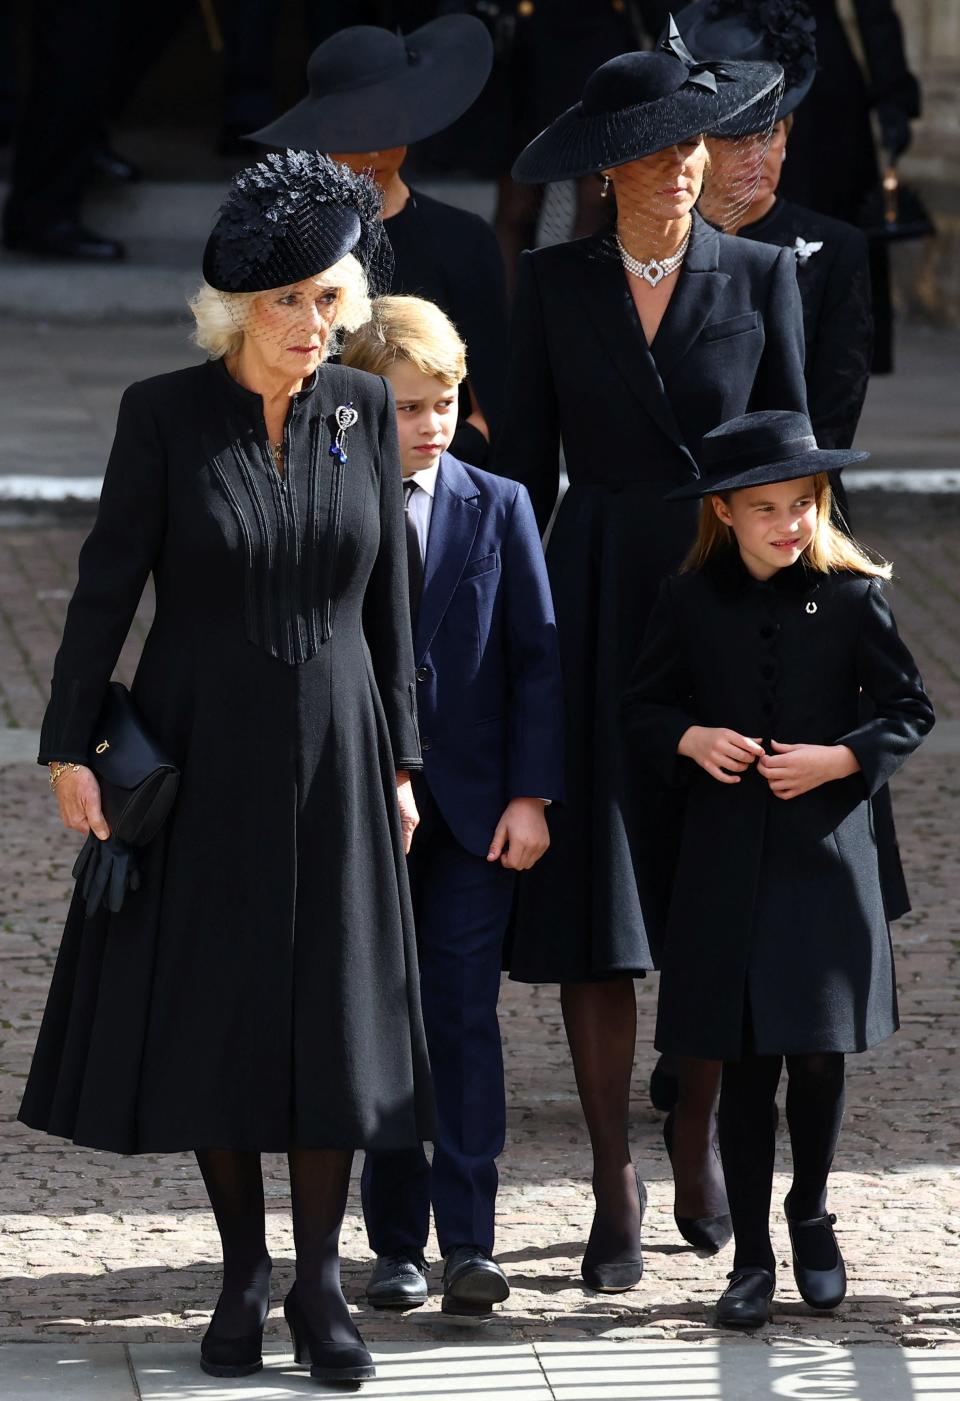 Camilla, Queen Consort, Prince George, Princess Charlotte, Catherine, Princess of Wales, Meghan, Duchess of Sussex, and Sophie, Countess of Wessex, seen after the State Funeral of Queen Elizabeth II on September 19, 2022 in London, England.